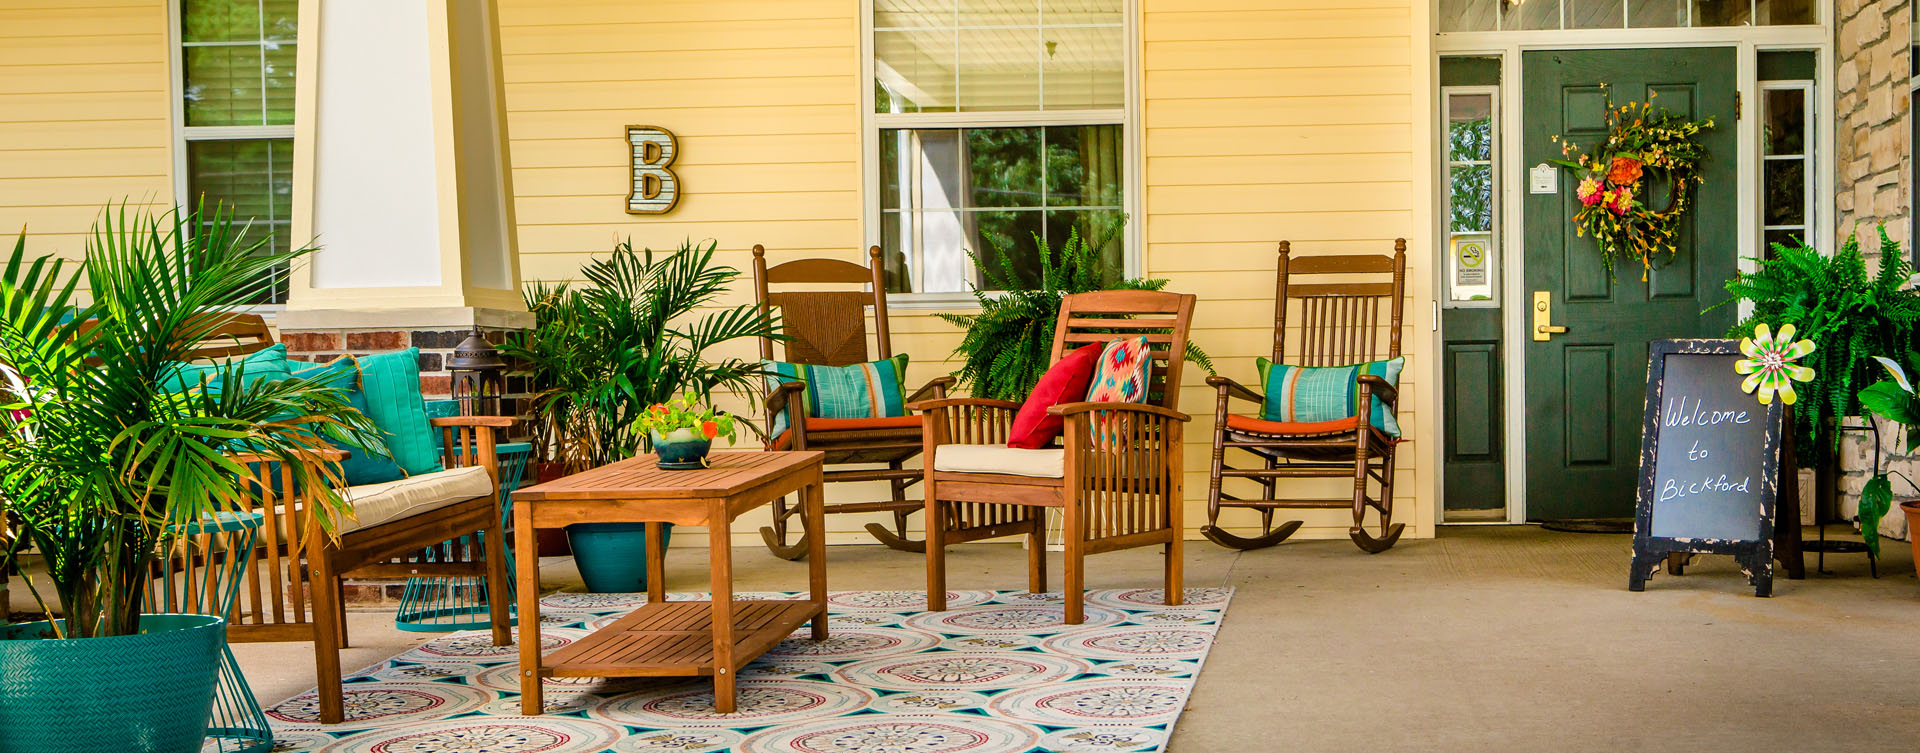 Relax in your favorite chair on the porch at Bickford of Macomb